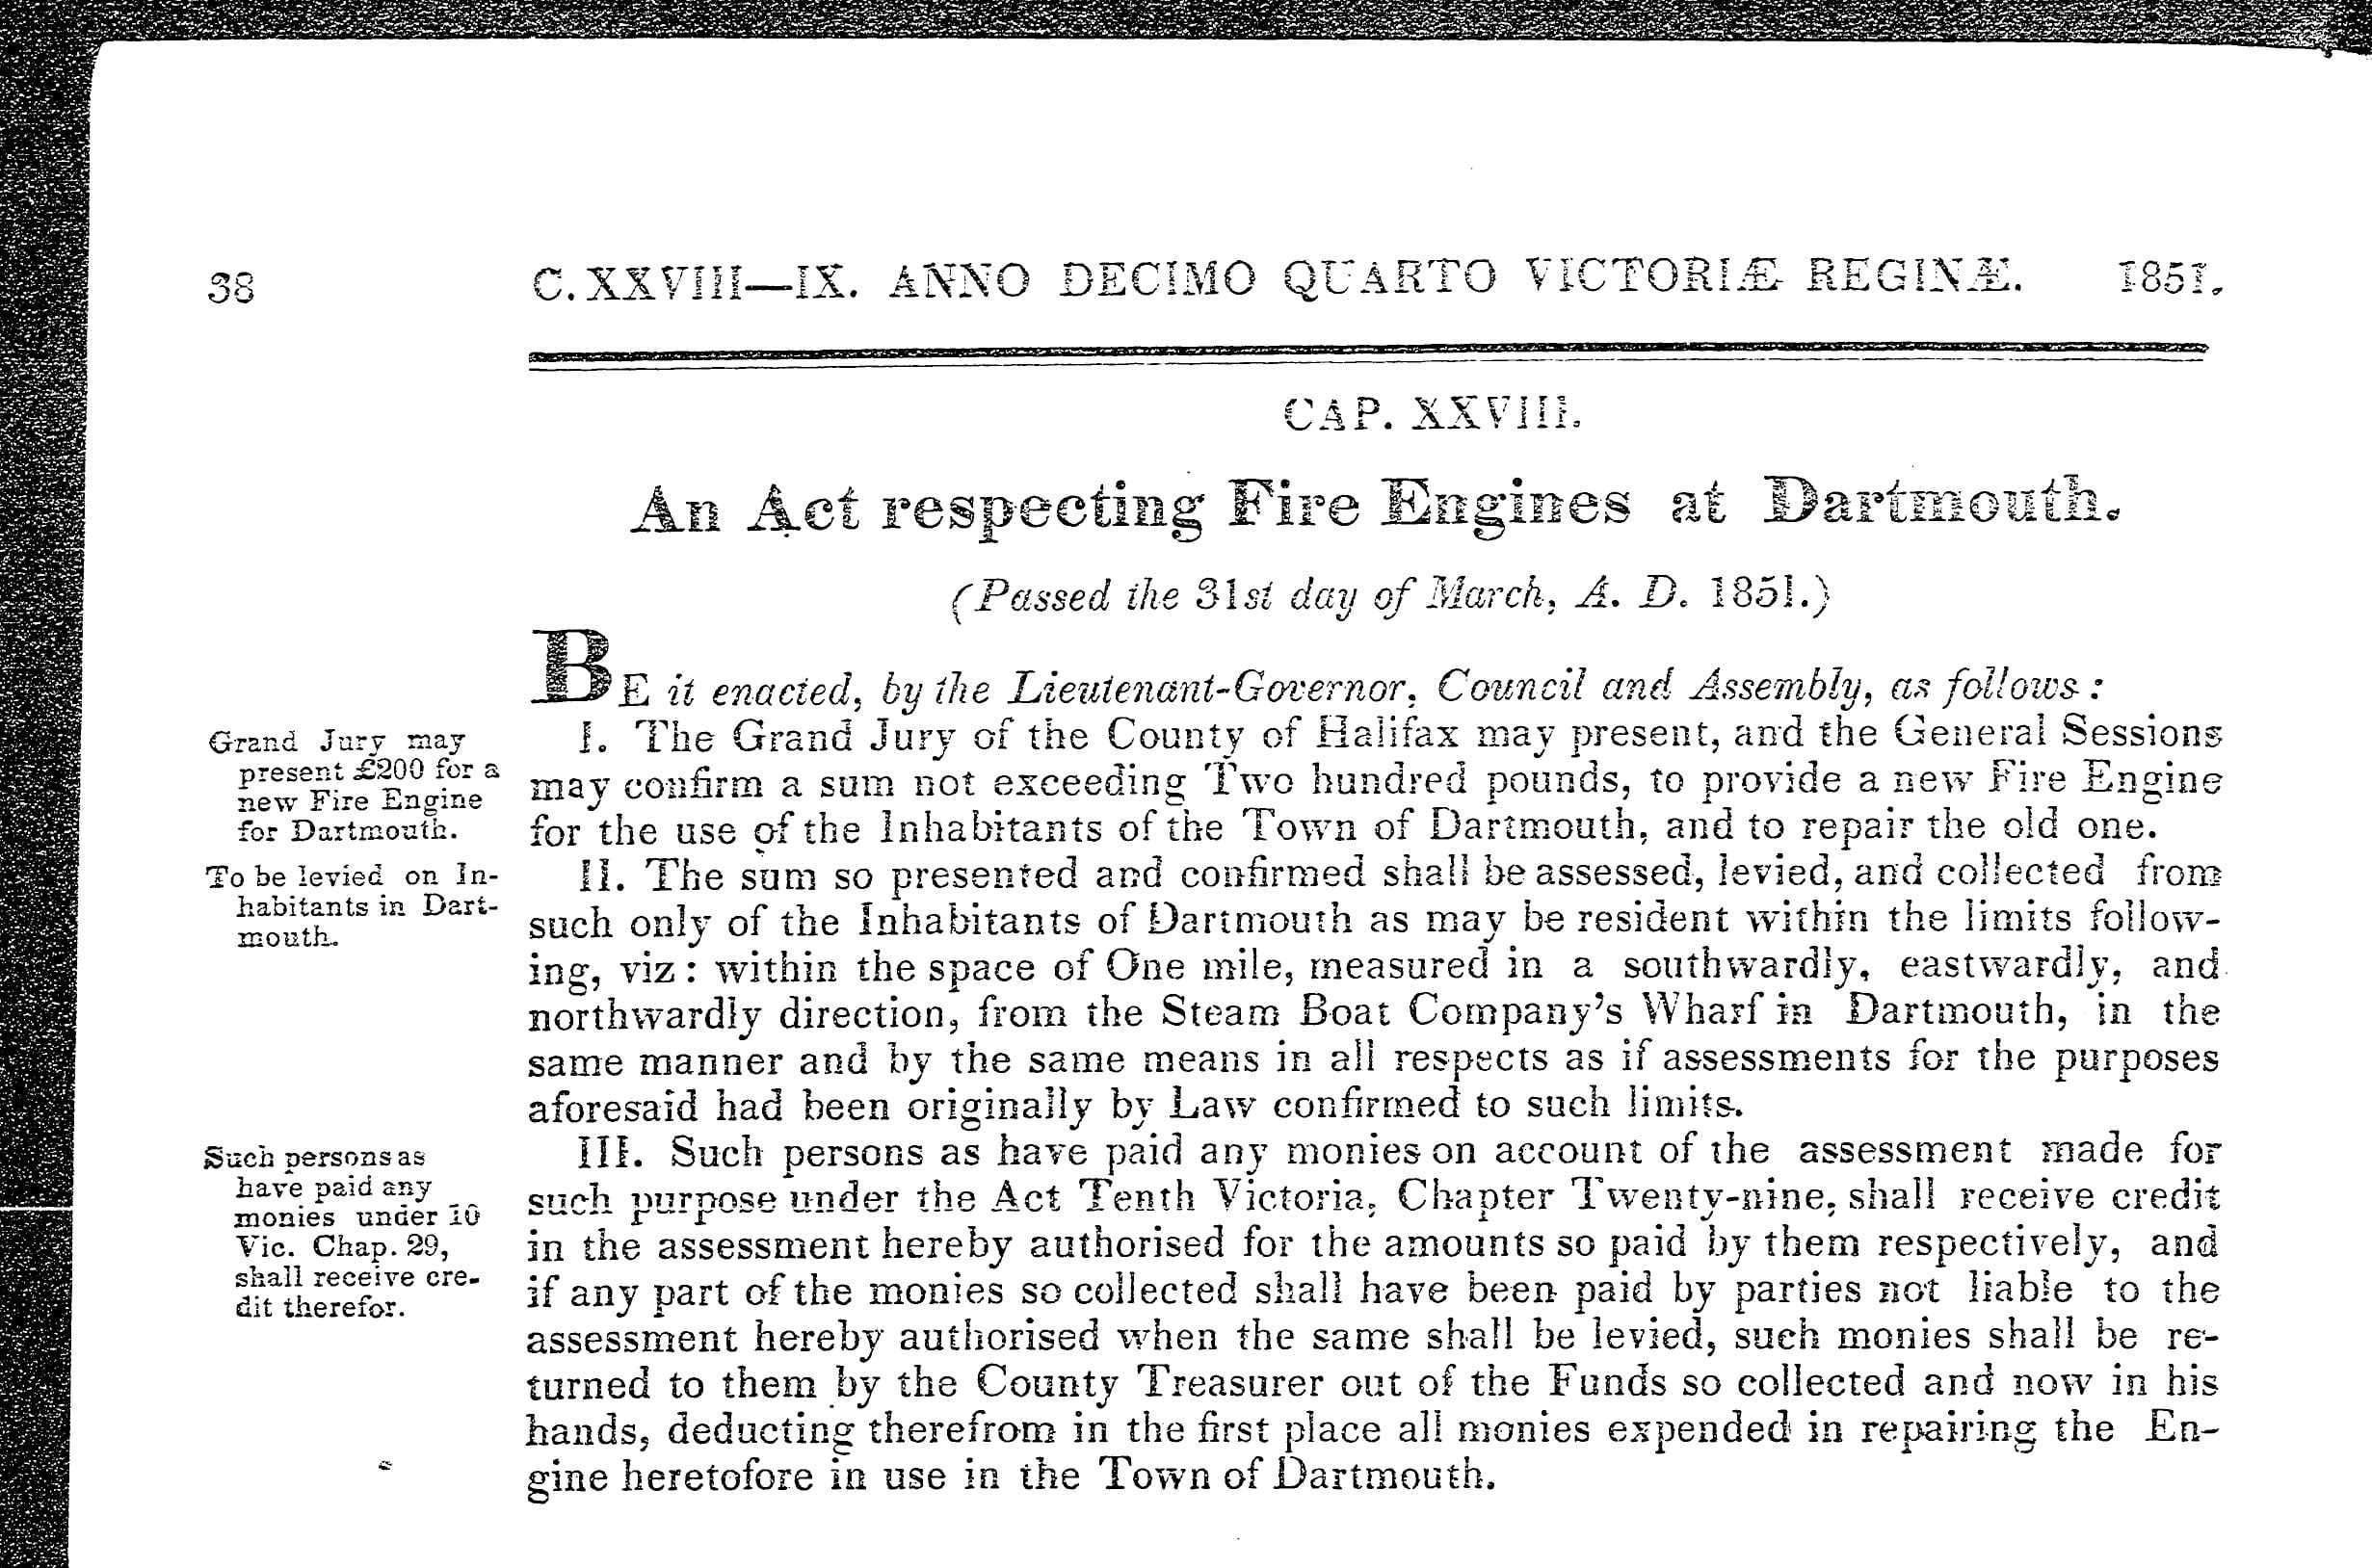 Respecting Fire Engines at (Dartmouth) (1st Session), 1851 c28